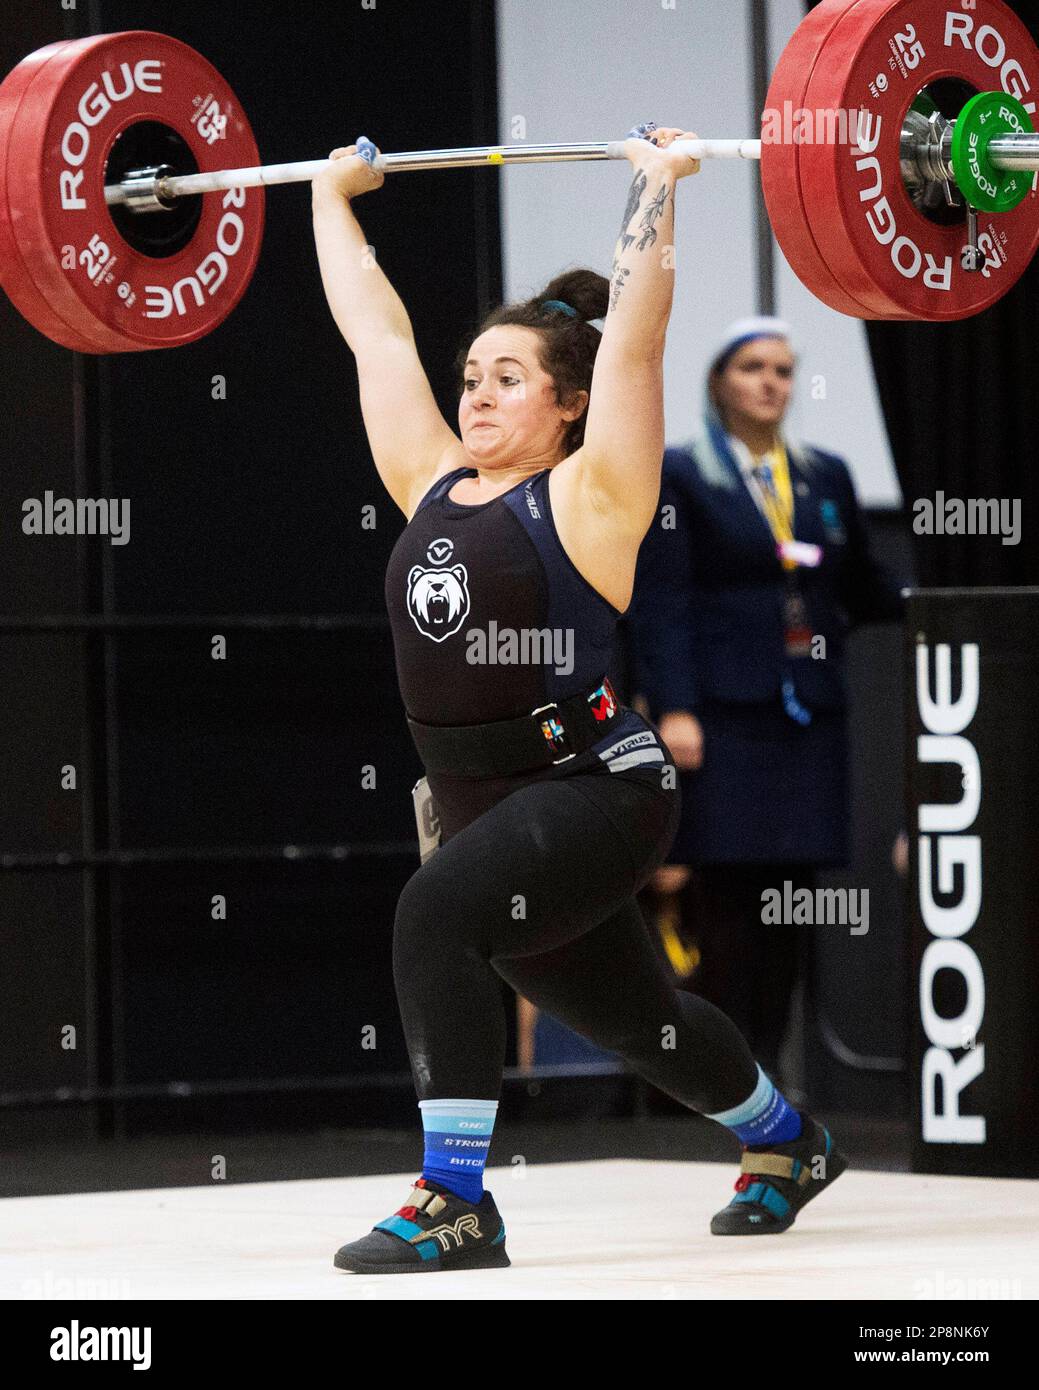 Columbus, Ohio, United States. 3th Mar, 2023. Estelle Rohr clean and jerks 122kgs in the Women's 76kg category at the Rogue Stage in Columbus, Ohio, USA. Credit: Brent Clark/Alamy Live News Stock Photo